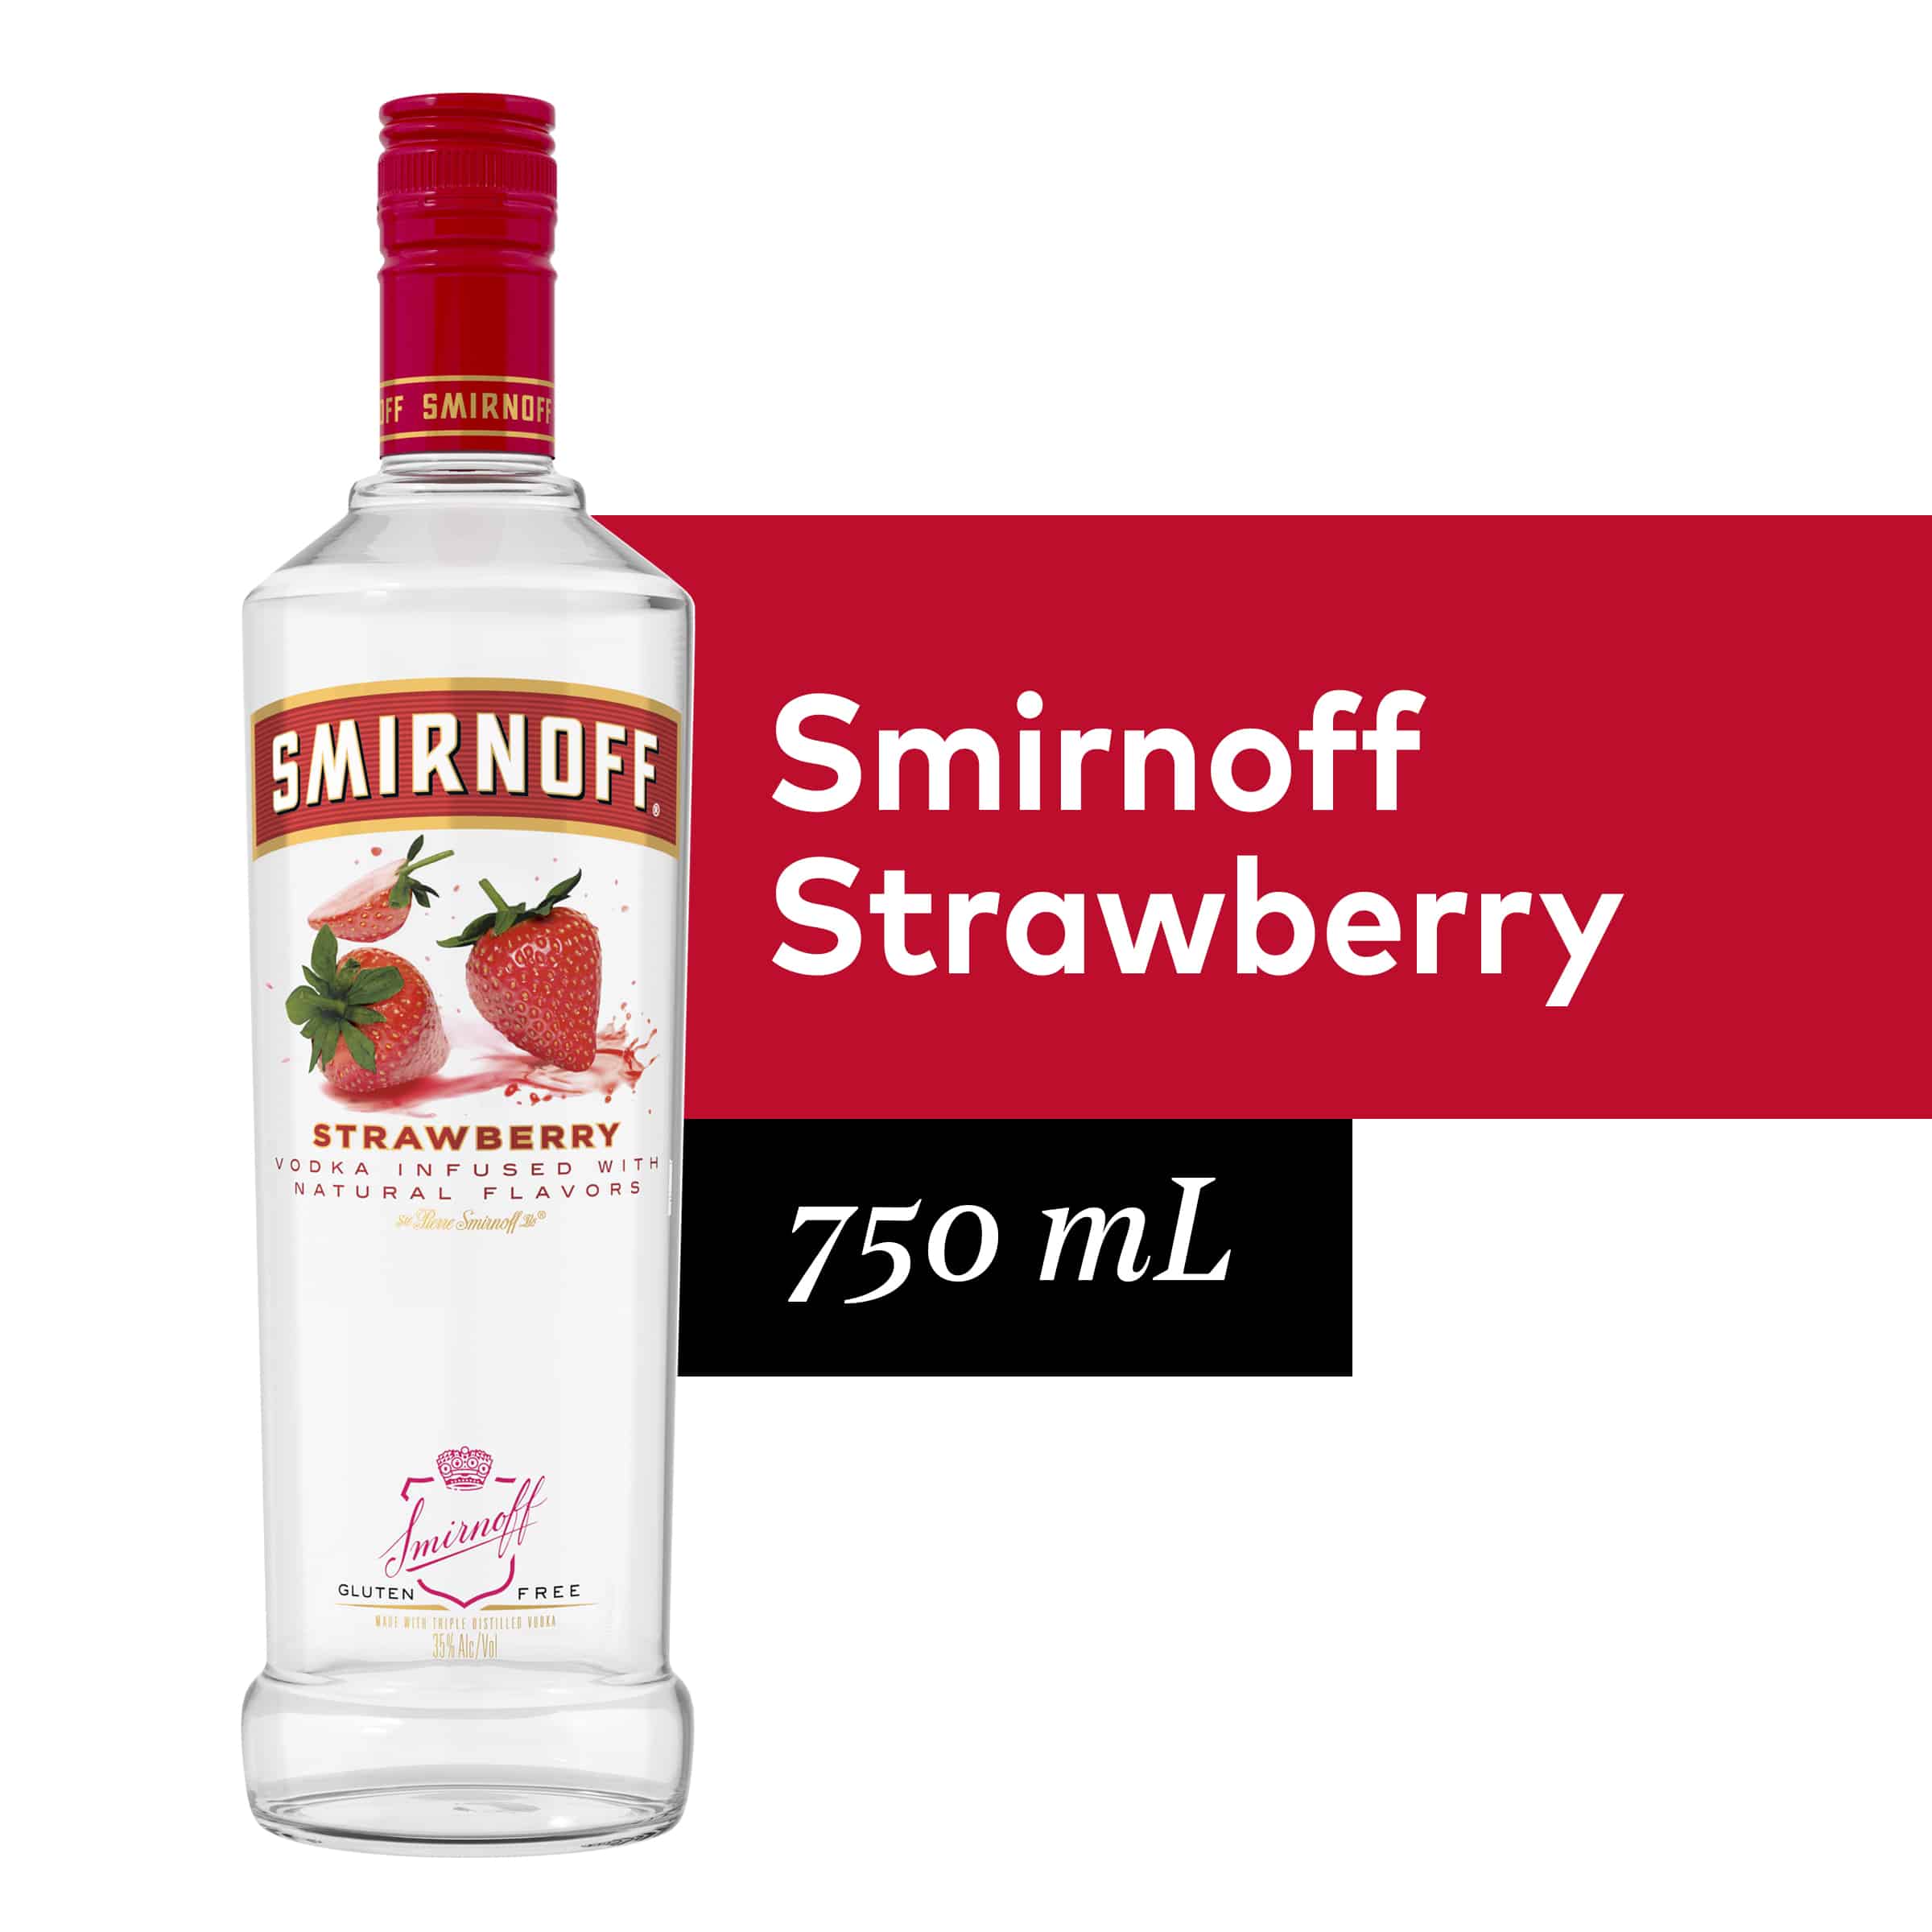 Smirnoff Strawberry 70 Proof (Vodka Infused With Natural Flavors)